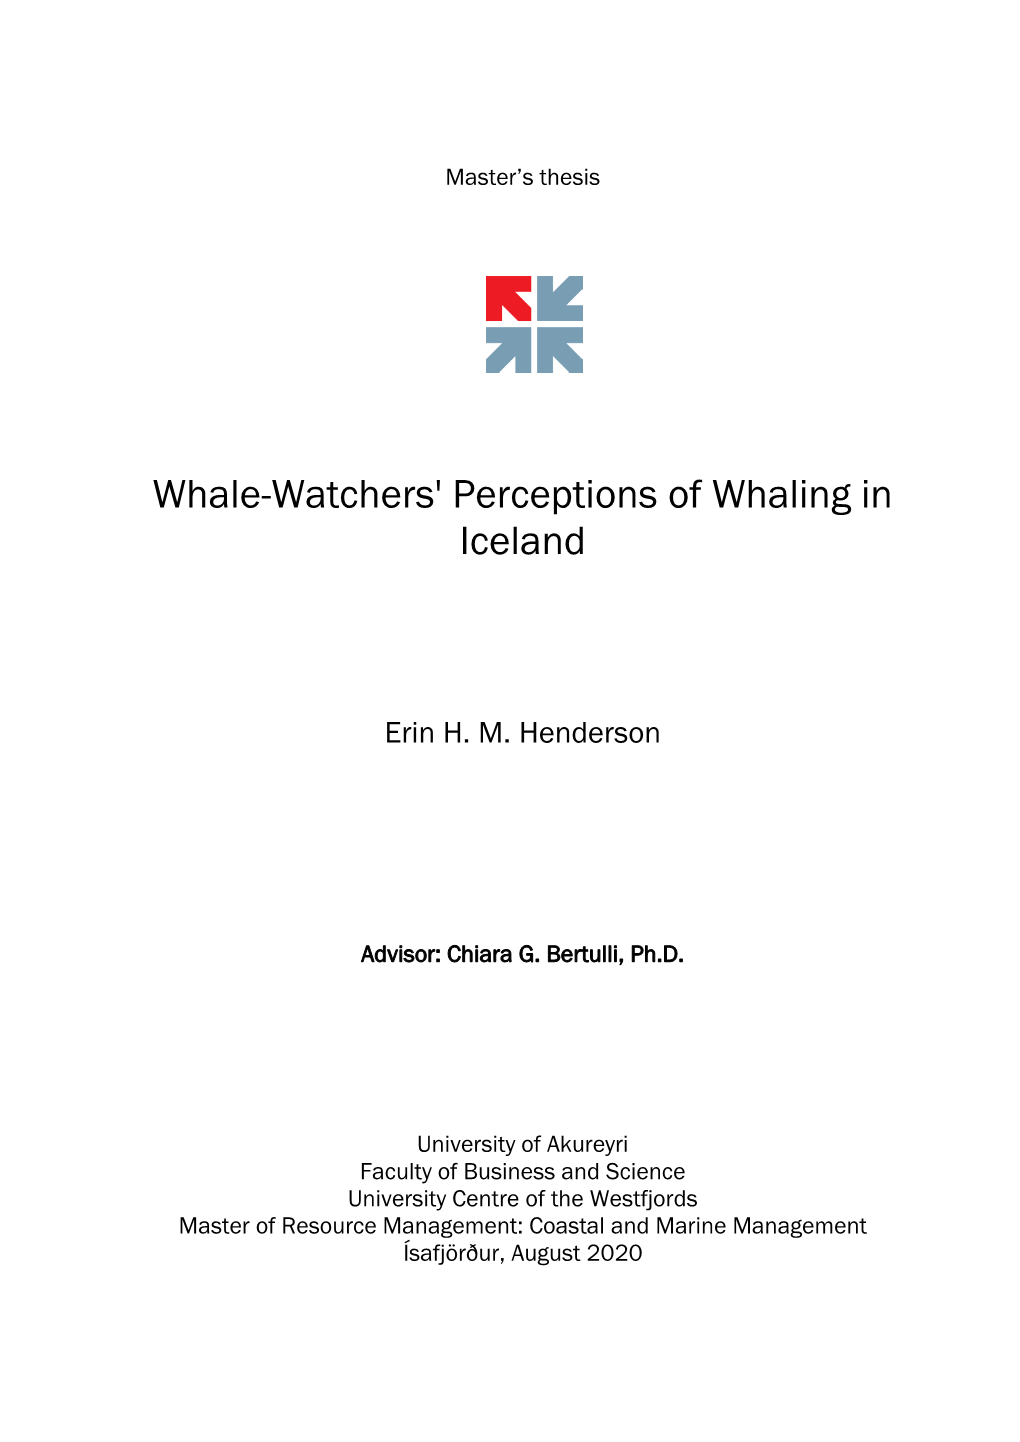 Whale-Watchers' Perceptions of Whaling in Iceland